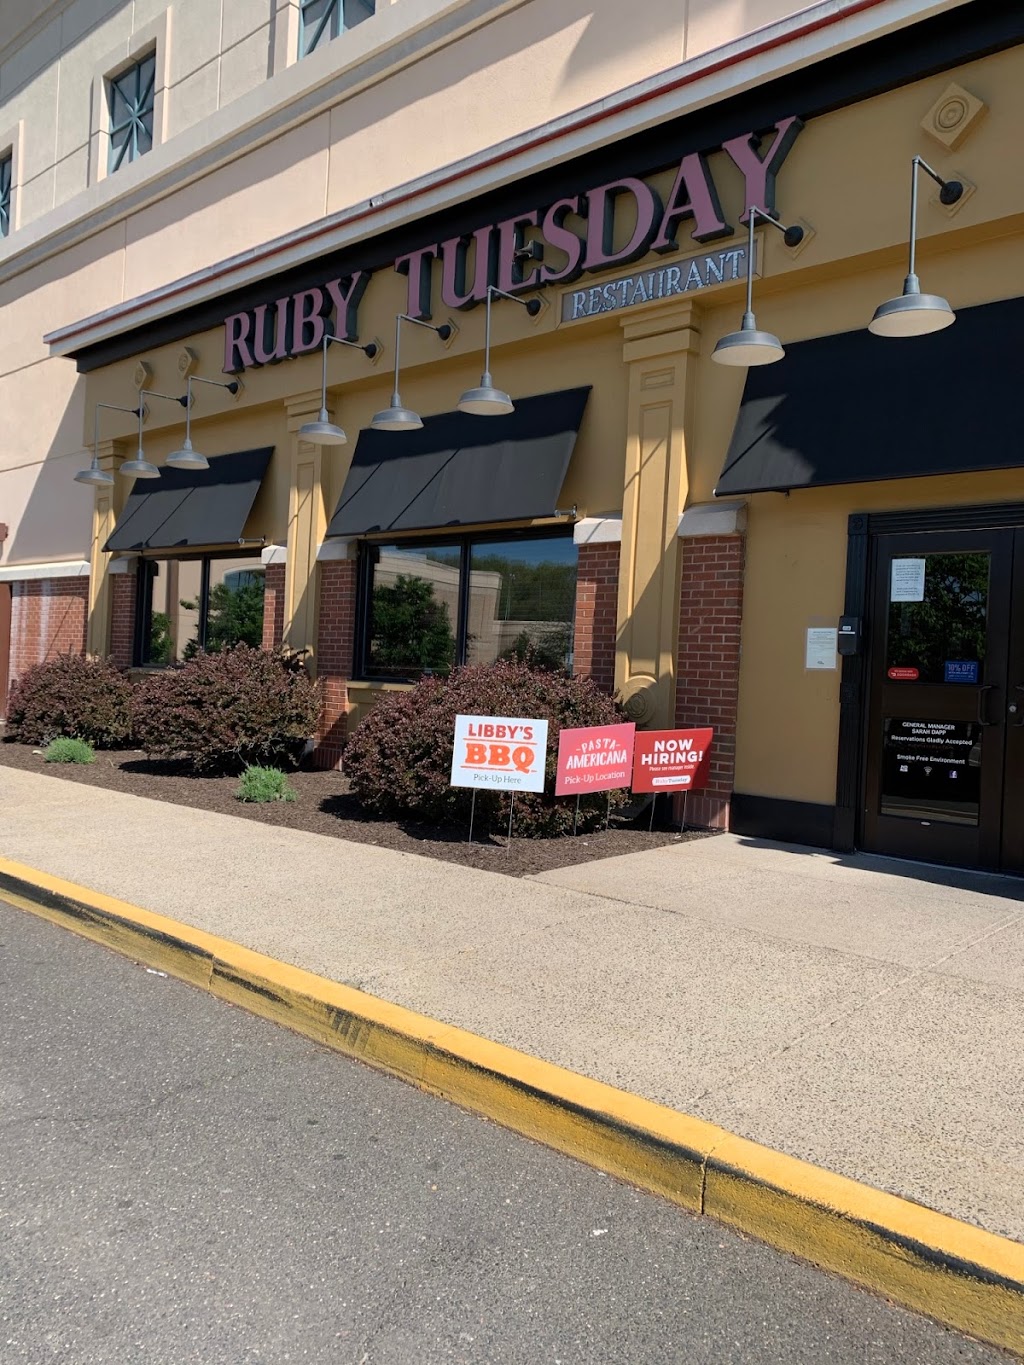 Libbys BBQ (Ruby Tuesday) | 470 Lewis Ave Suite C, Meriden, CT 06451 | Phone: (203) 630-1703